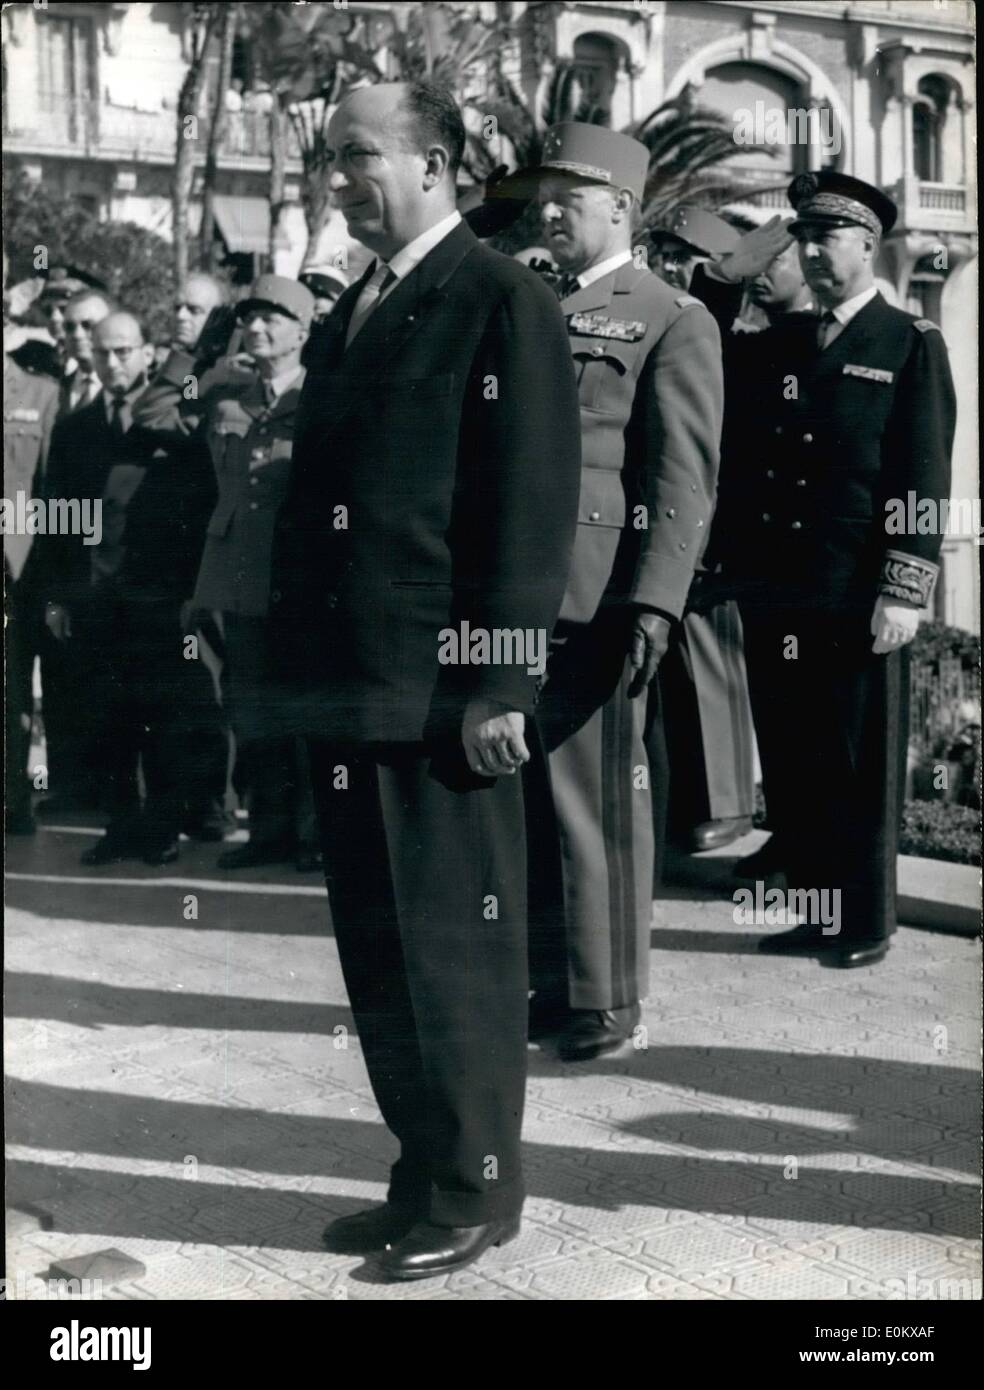 Nov. 11, 1950 - Algeria: Jean Morin takes over: Jean Morin who succeeds M. Delouvrier as Government's delegate general to Algeria took over yesterday. M. Jean Morin (foreground) pictured during the ceremony at the war memorial in Algiers yesterday. Stock Photo